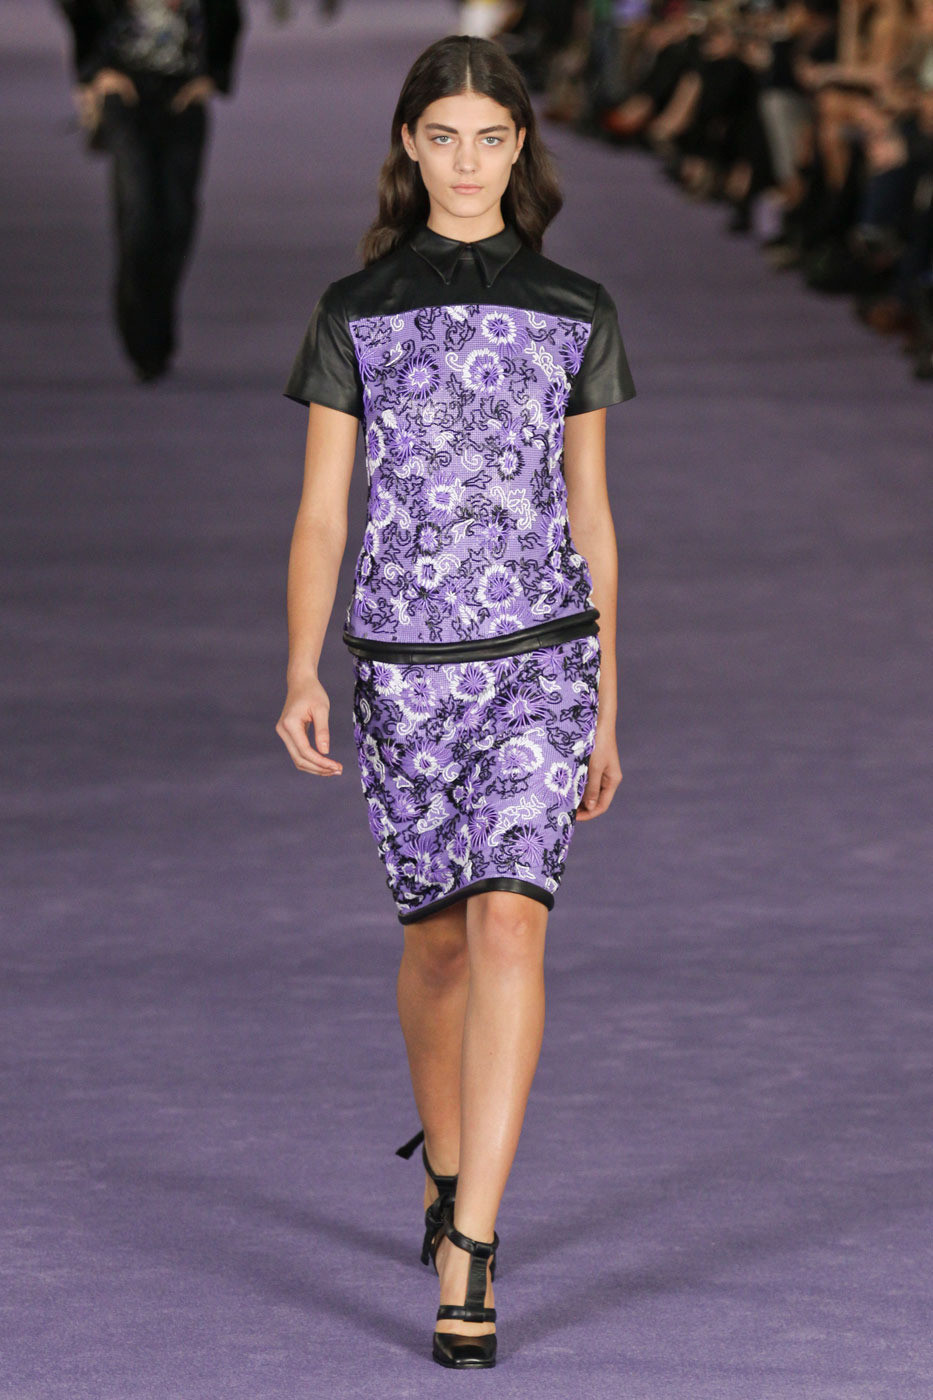 Christopher Kane Fall 2012 Esuo Xc Q 4 Ywzx